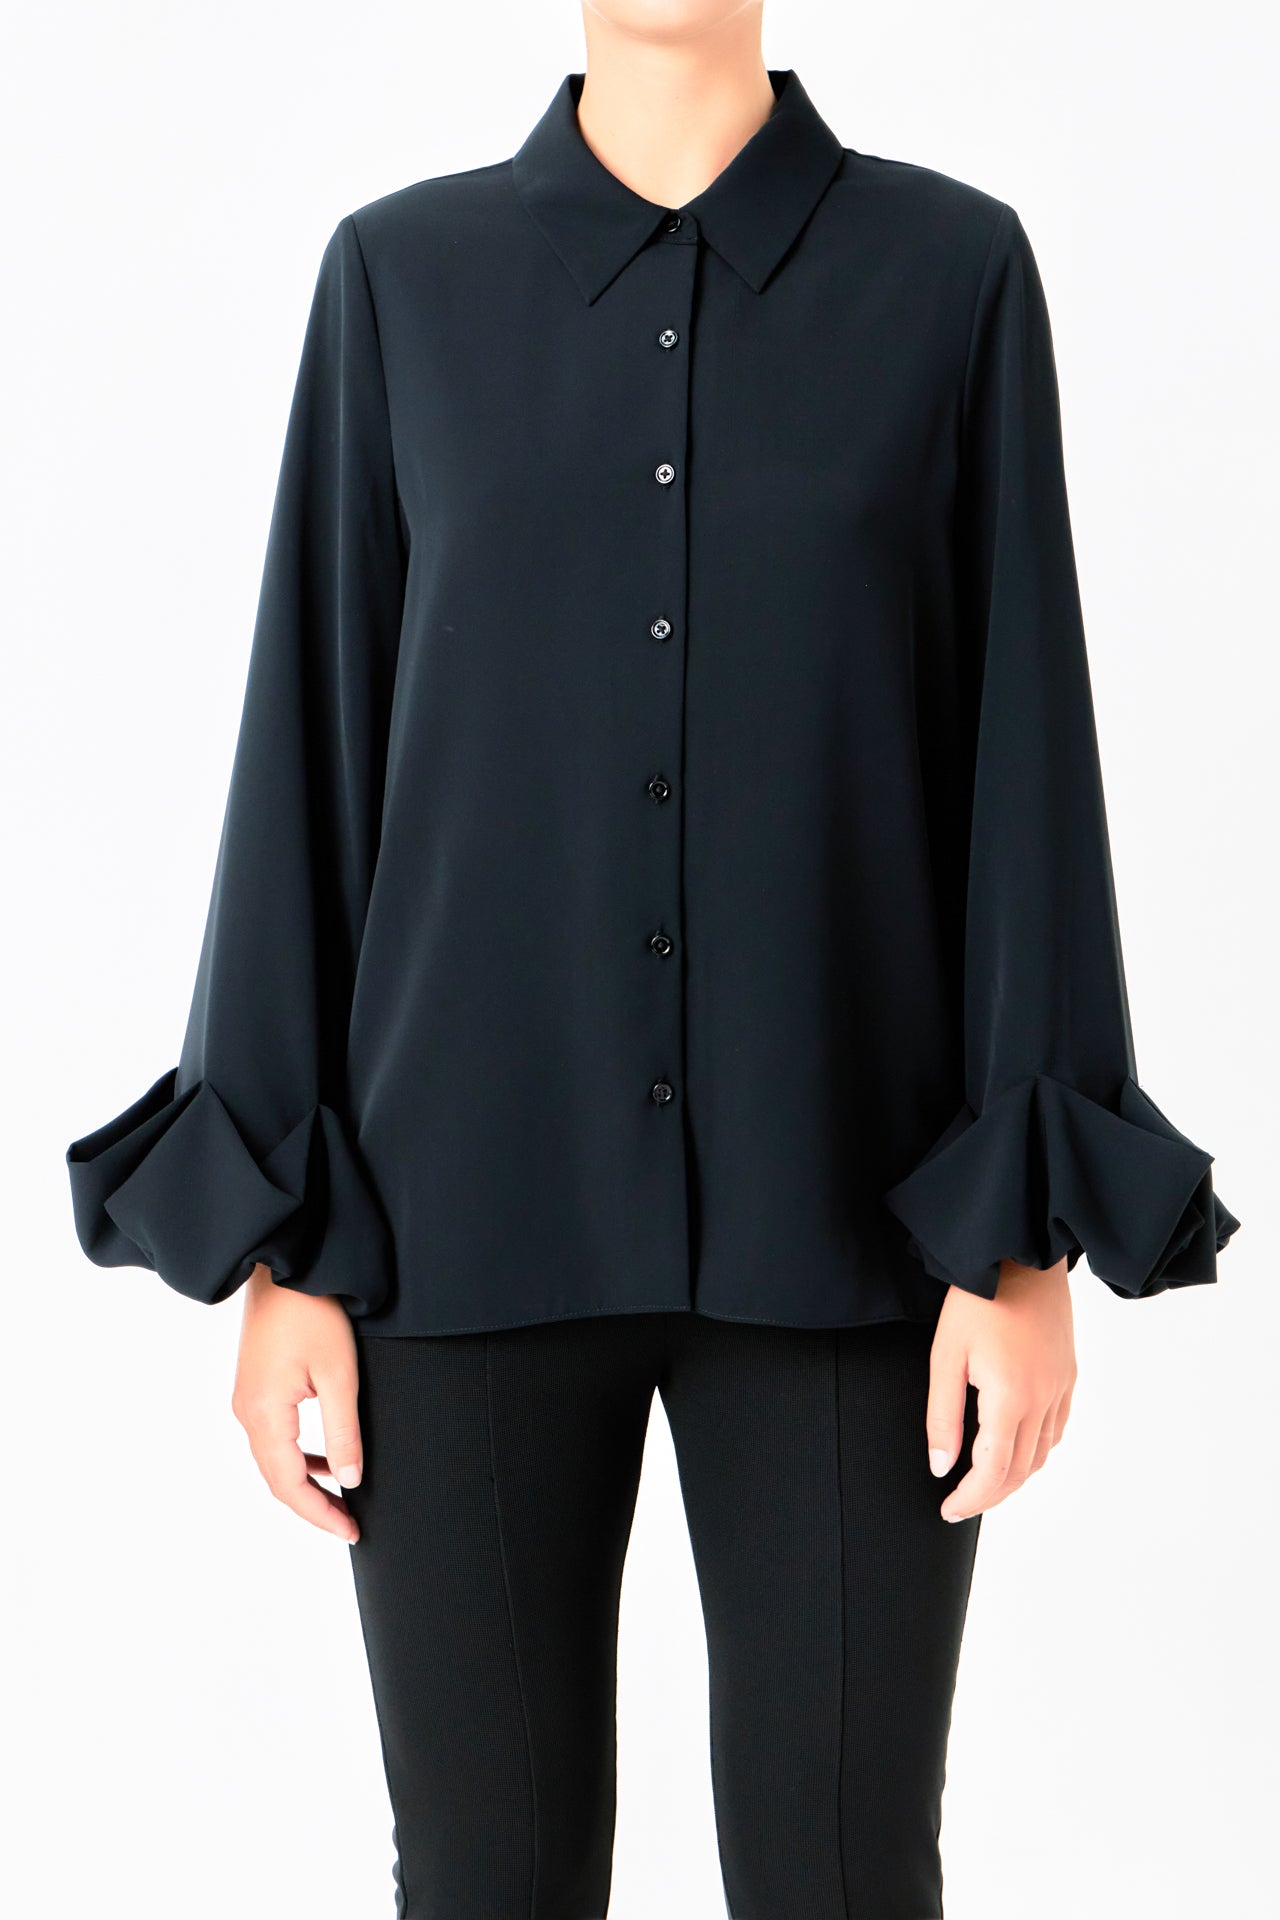 ENDLESS ROSE - Bubble Accent Dress Shirt - SHIRTS & BLOUSES available at Objectrare